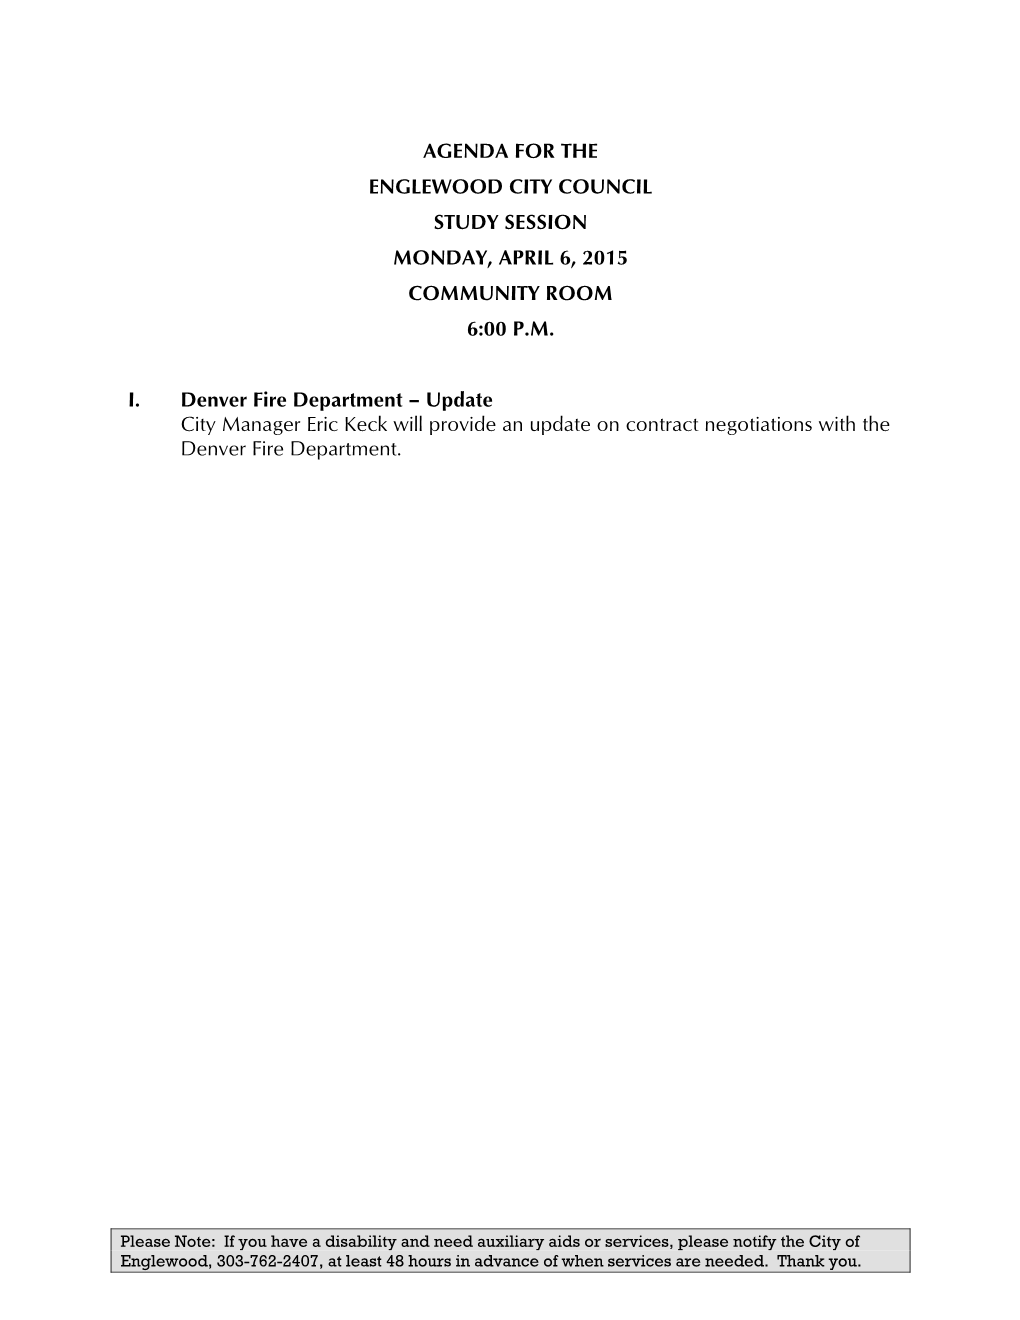 Agenda for the Englewood City Council Study Session Monday, April 6, 2015 Community Room 6:00 P.M